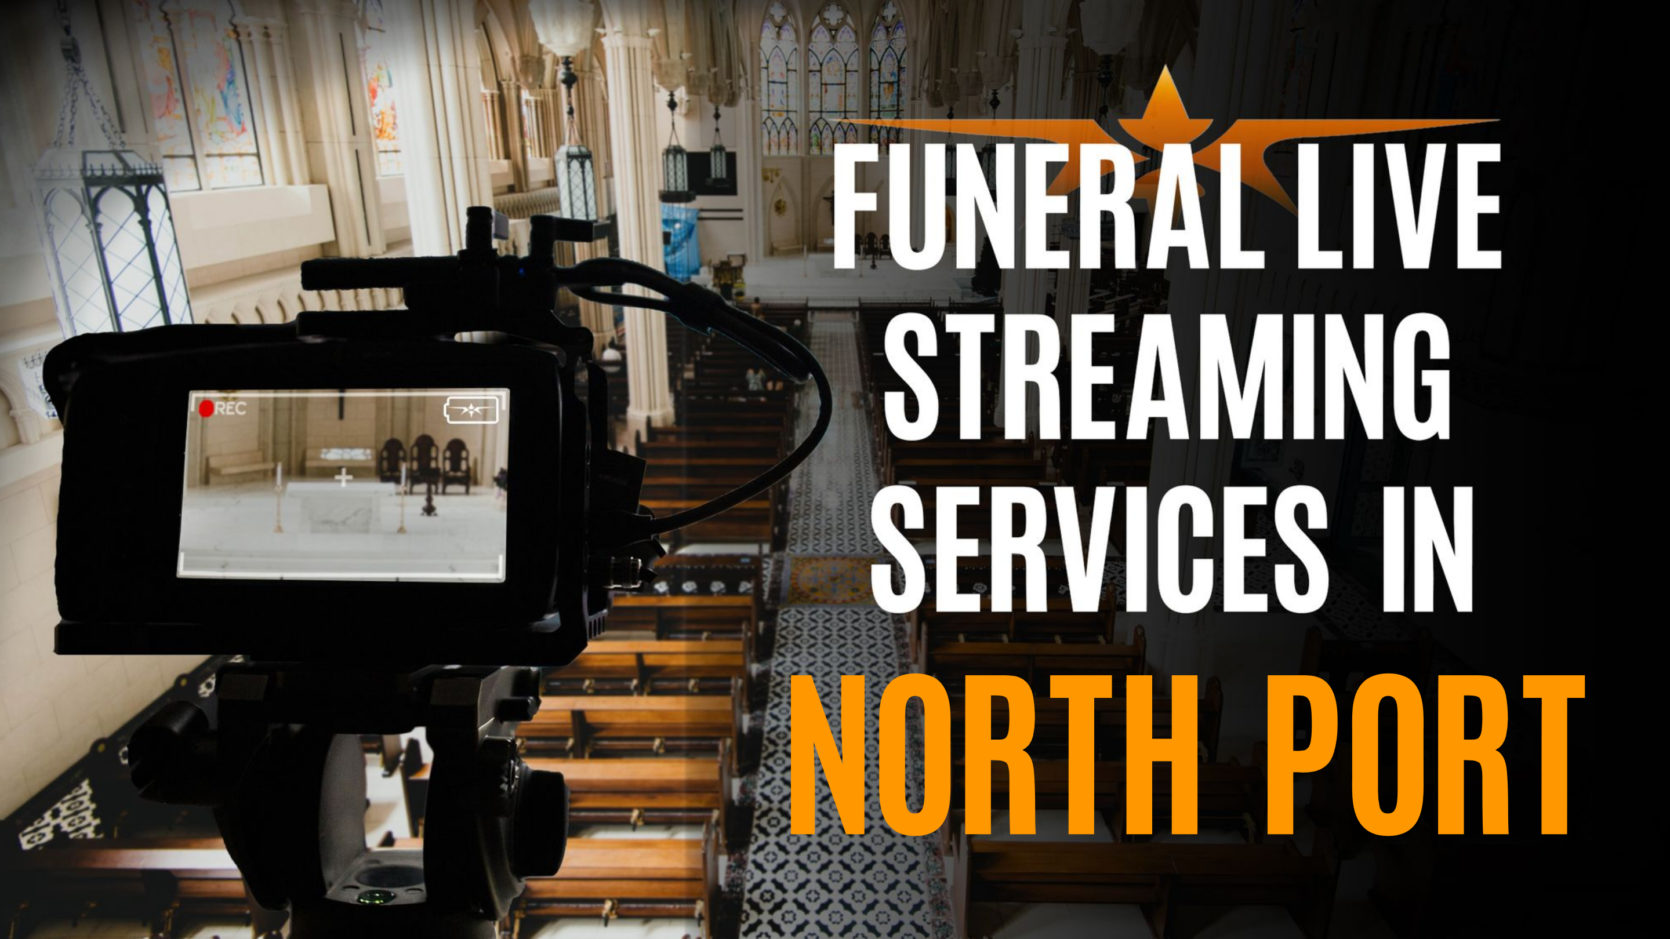 Funeral Live Streaming Services in North Port